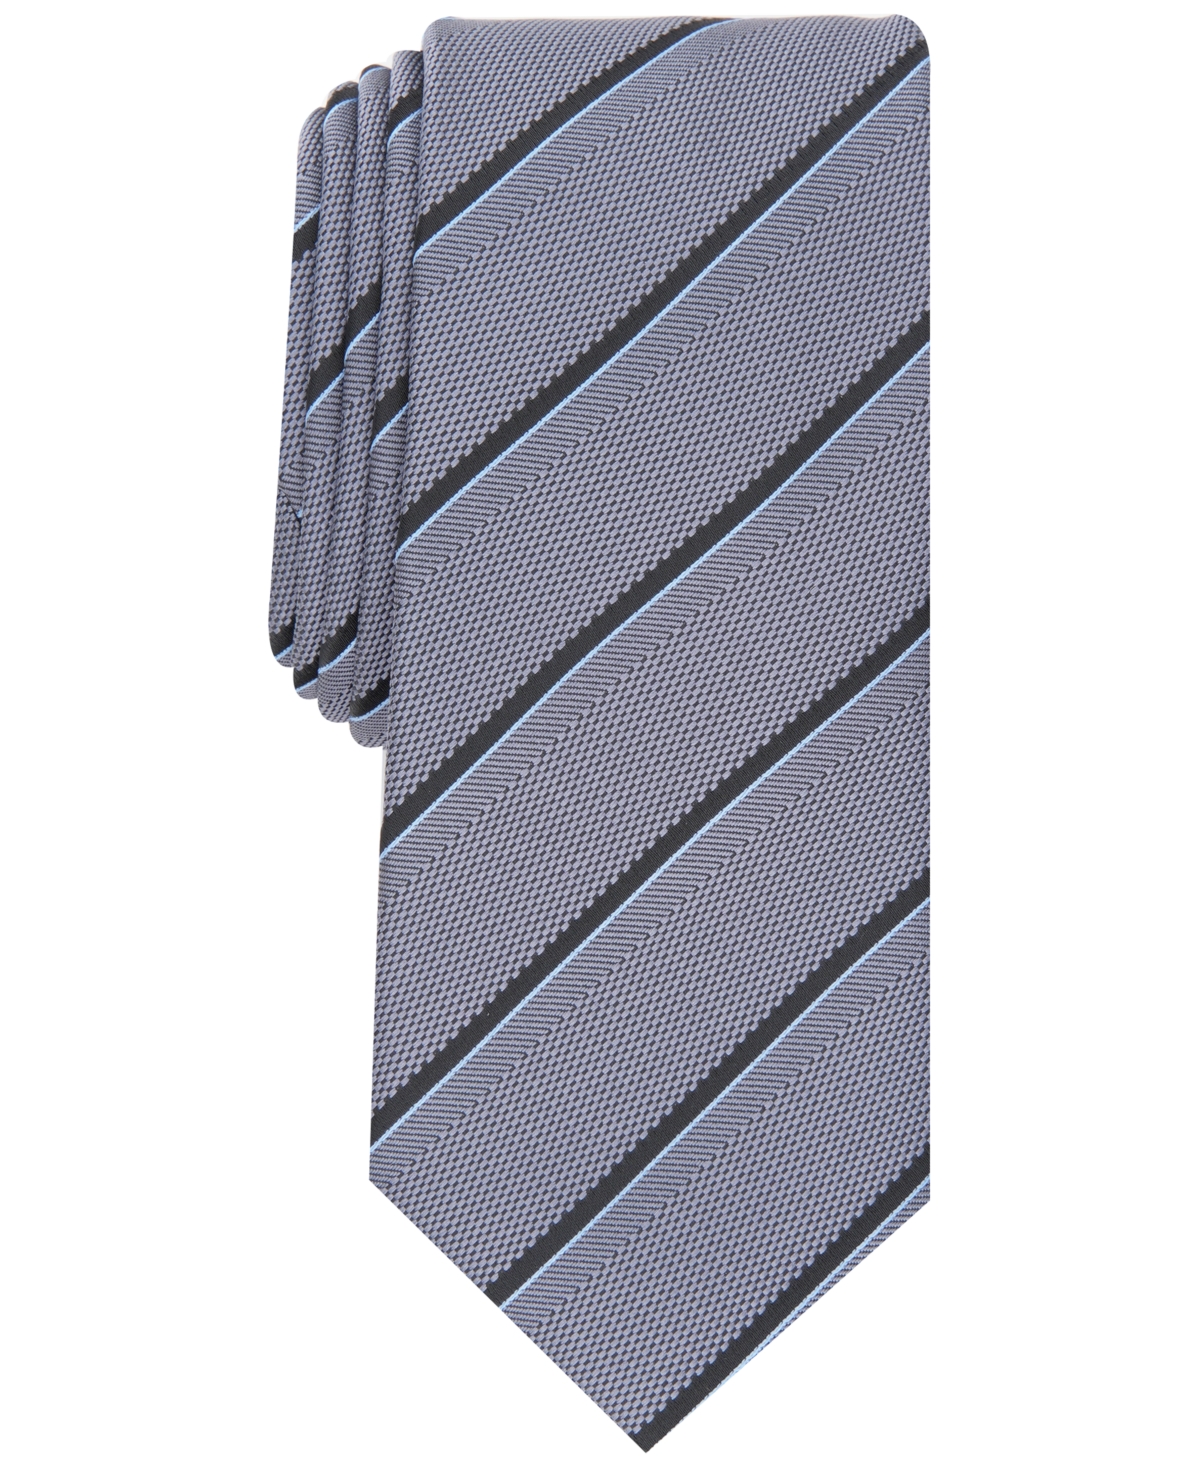 Men's Clarkson Stripe Tie, Created for Macy's - Charcoal